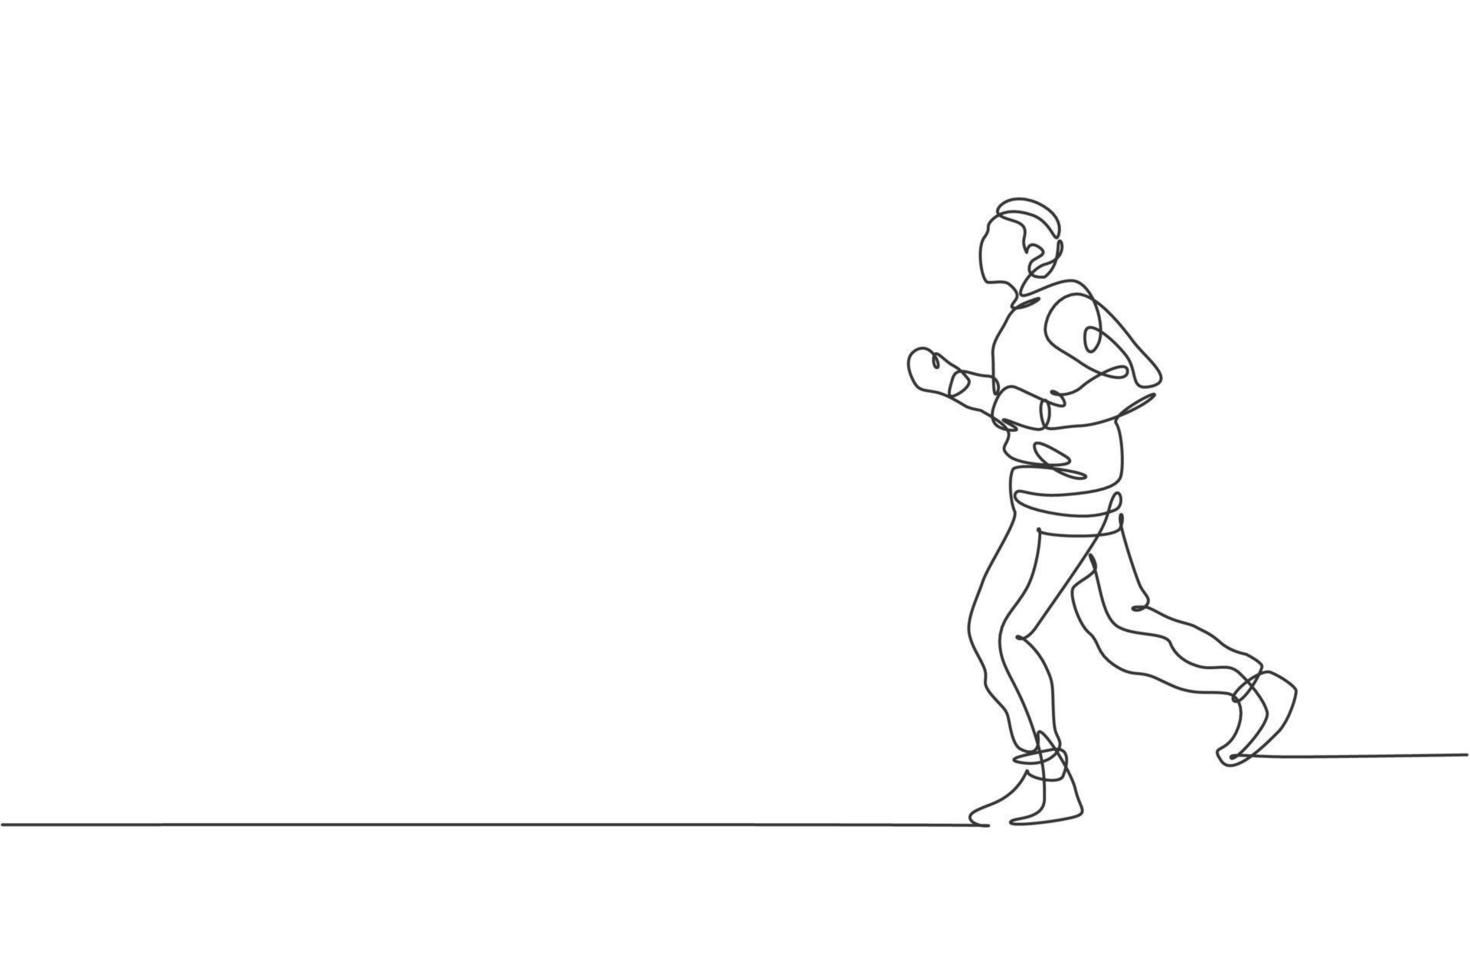 One single line drawing of young energetic man runner run relax at the morning vector illustration graphic. Healthy sport training concept. Modern continuous line draw design for running race banner